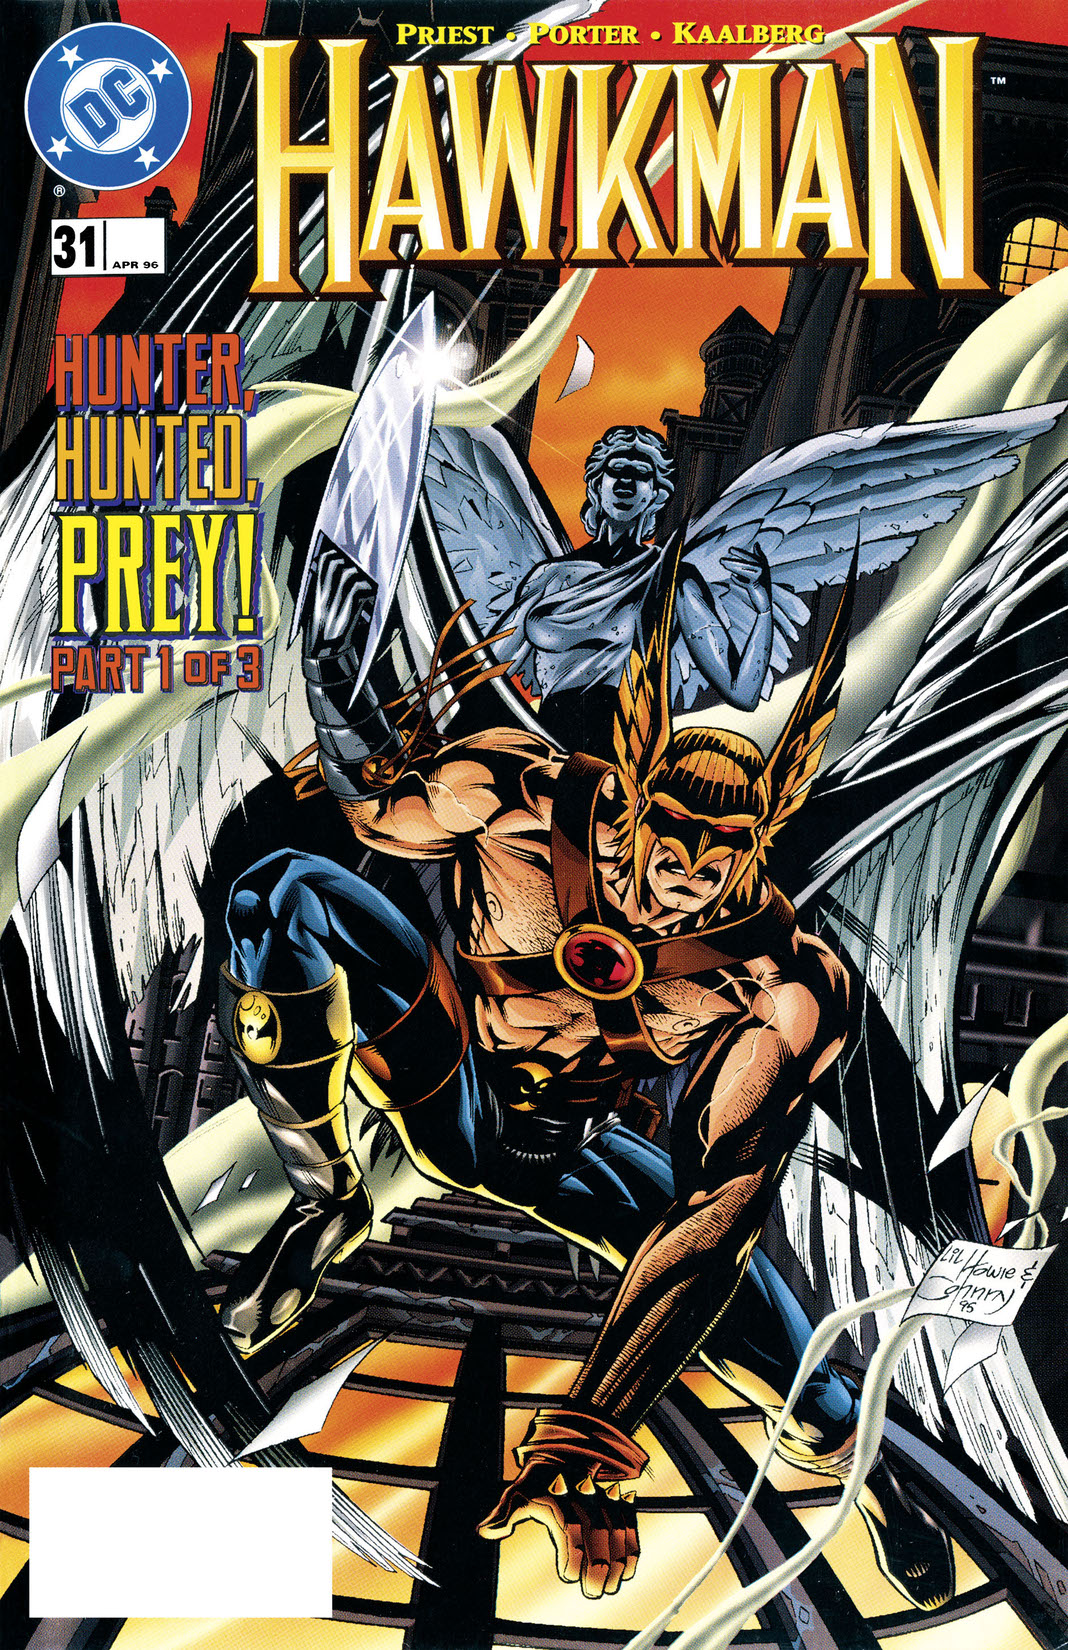 Hawkman (1993-1996) #31 preview images